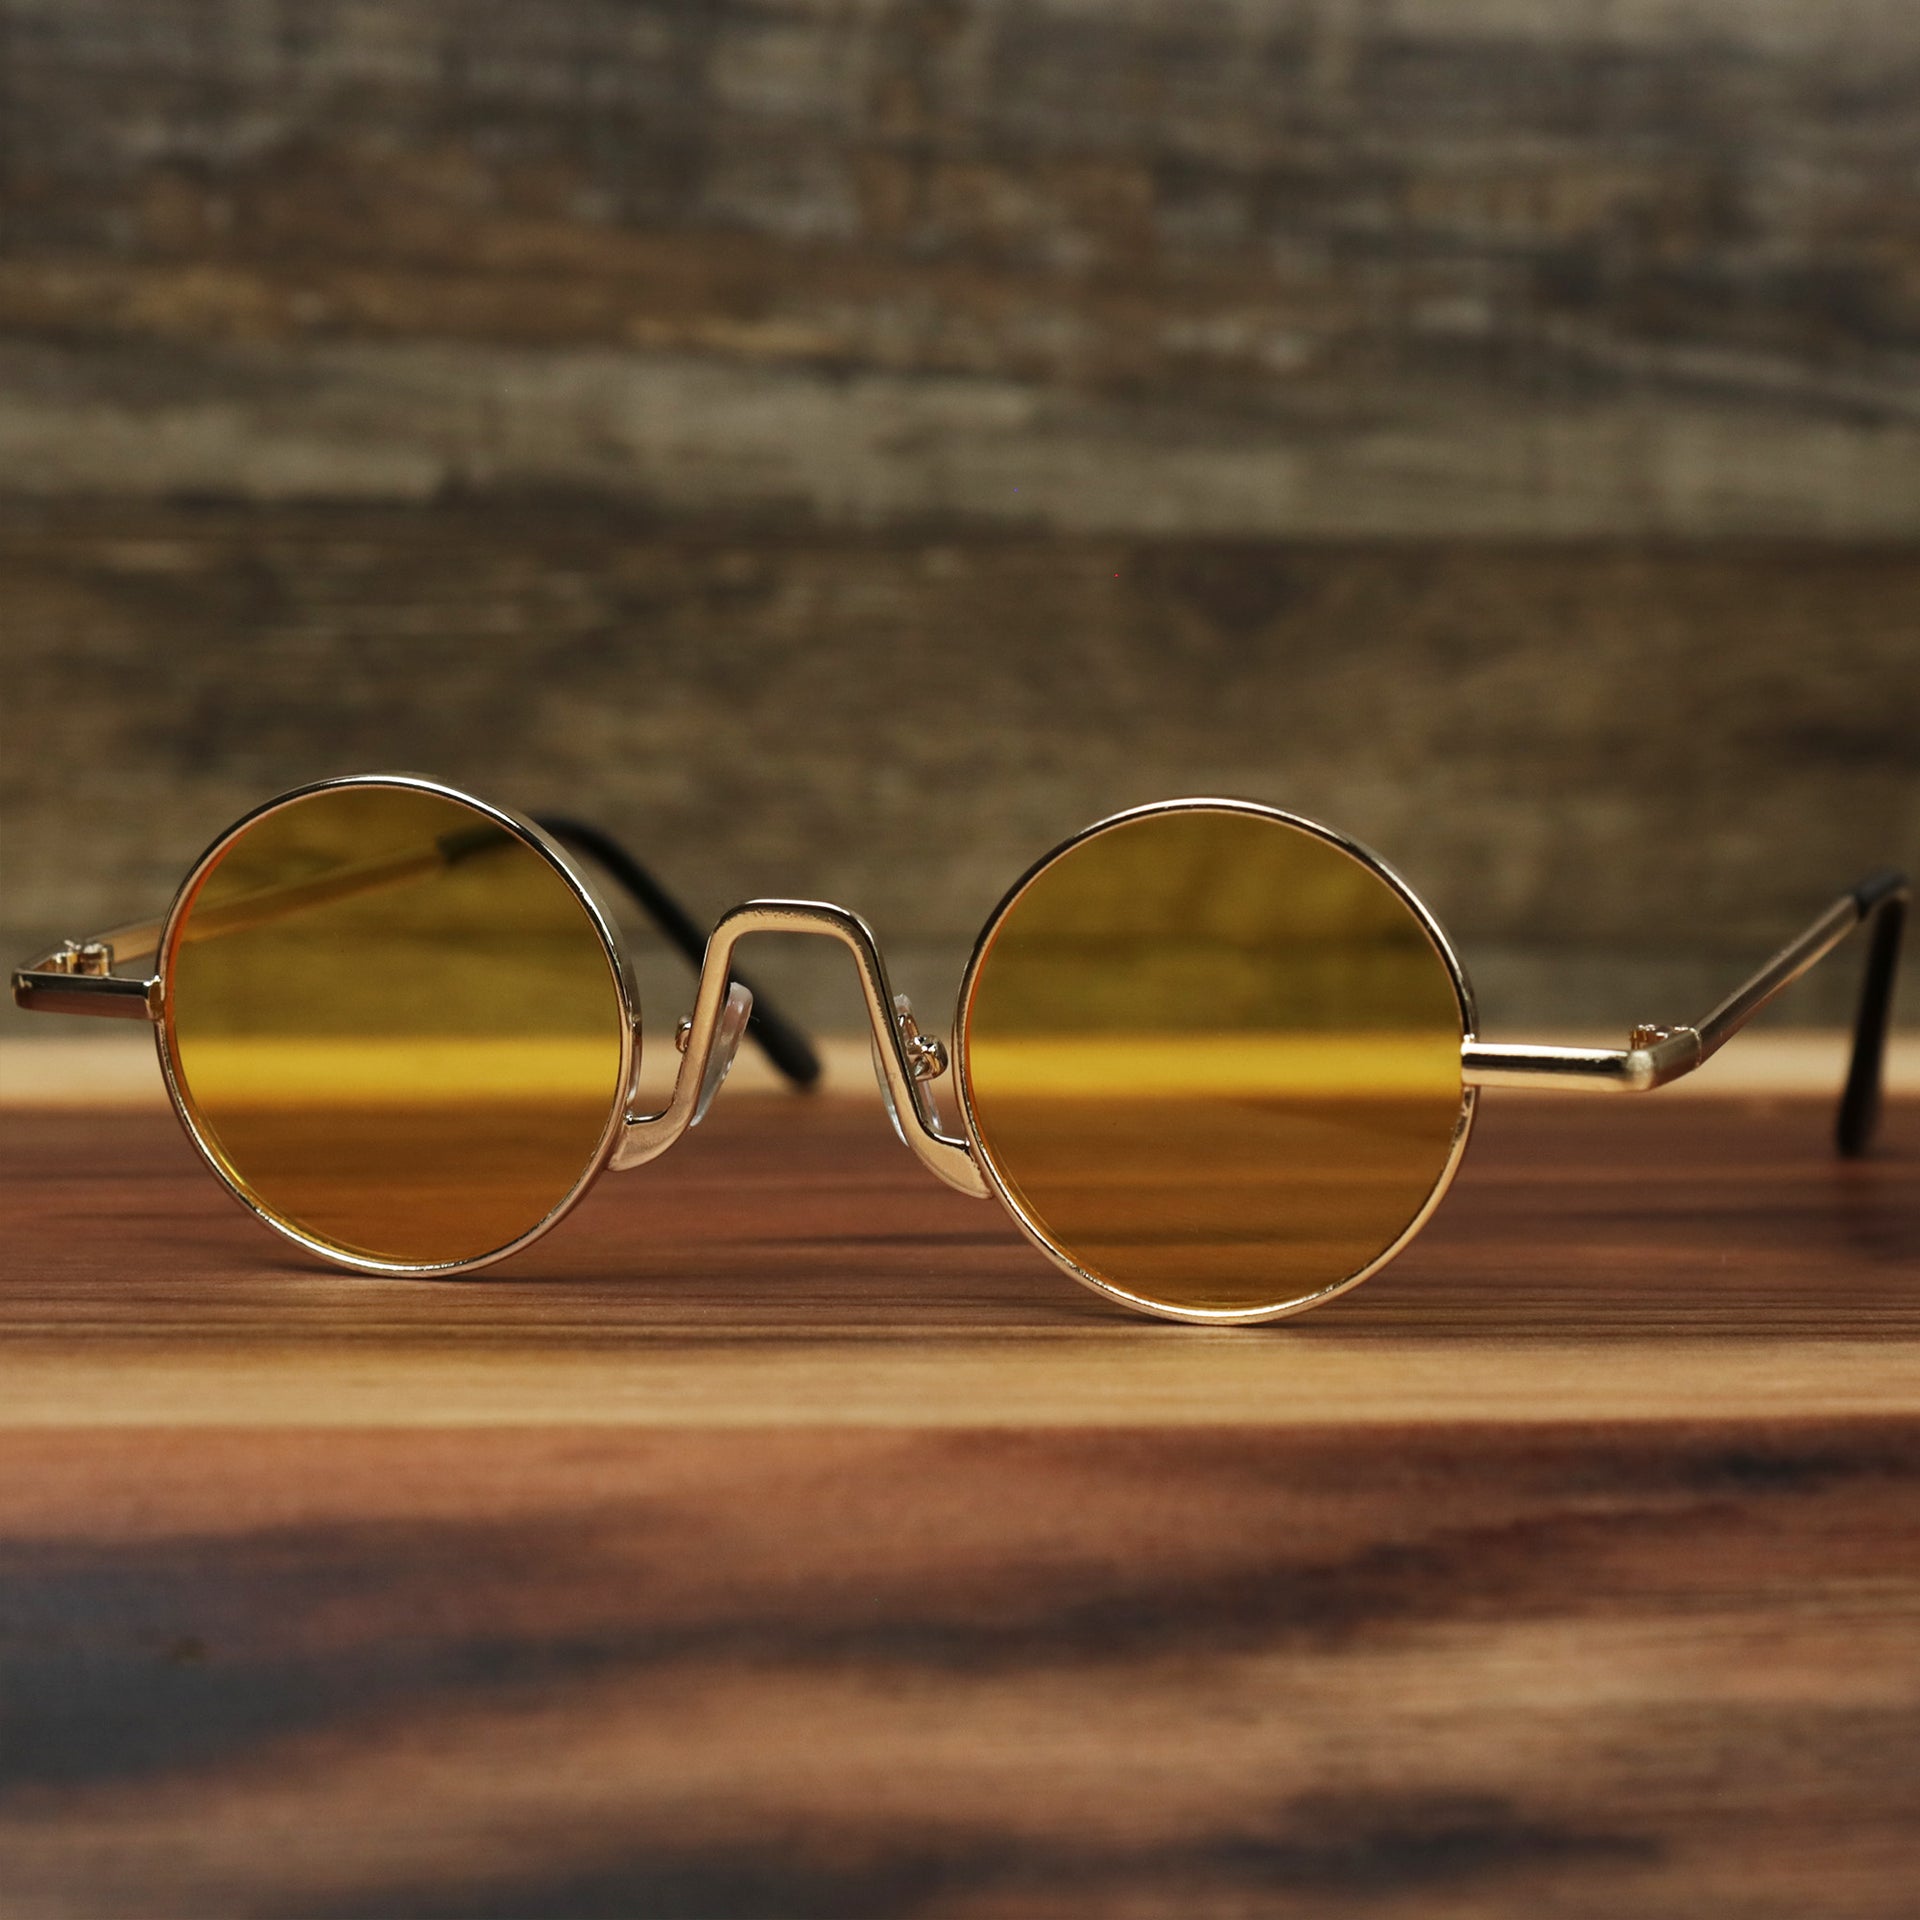 The Round Frames Yellow Lens Sunglasses with Gold Frame